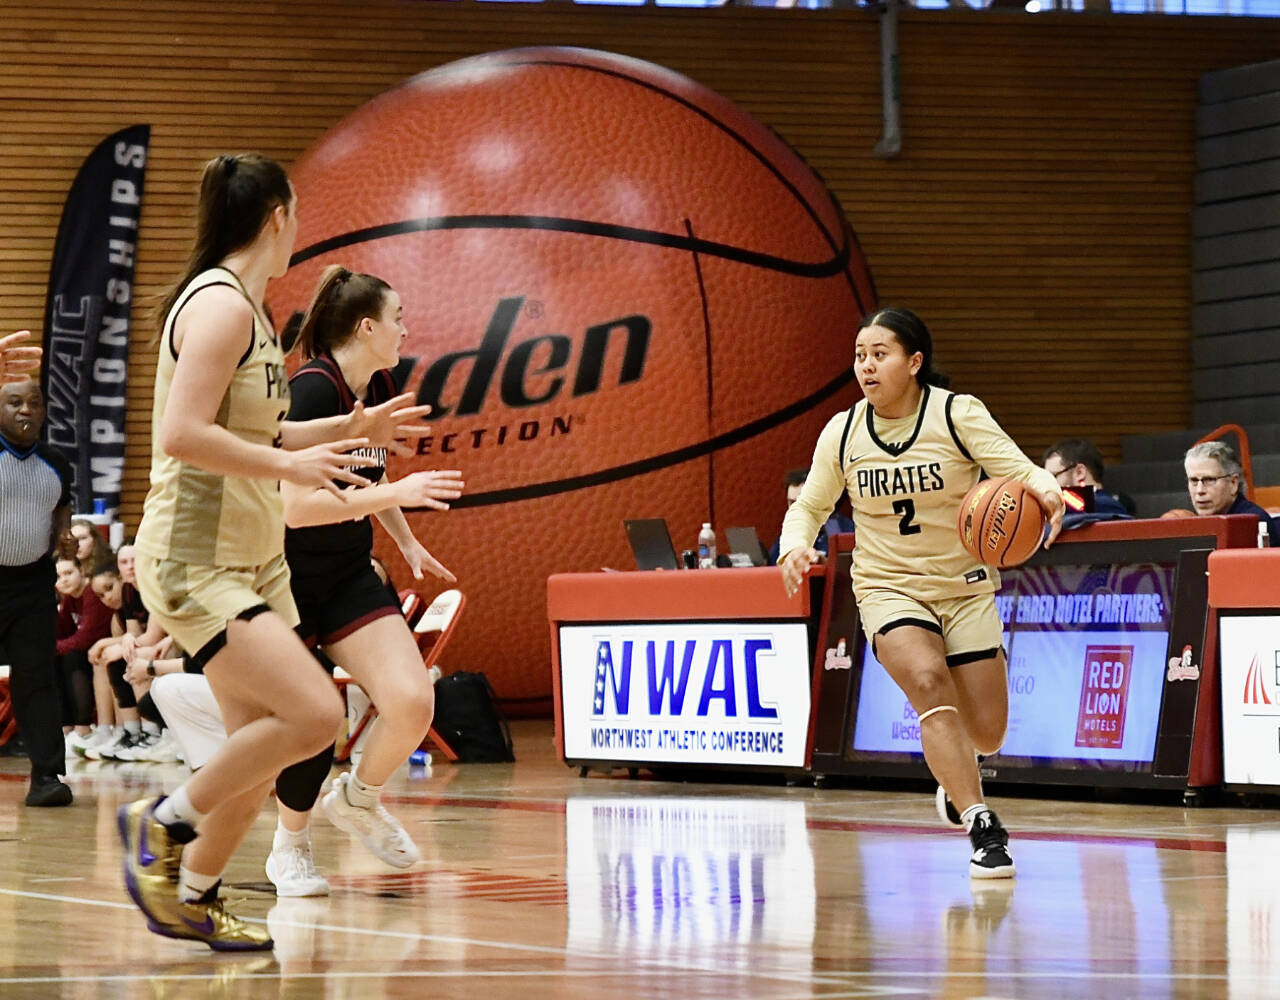 Jay Cline/Peninsula College Athletics
Peninsula College's Tatianna Kamae (2) brings the ball up the court against North Idaho in the Pirates' 56-48 win in the opening round of the NWAC Tournament held in Everett. At left is Hope Glasser.